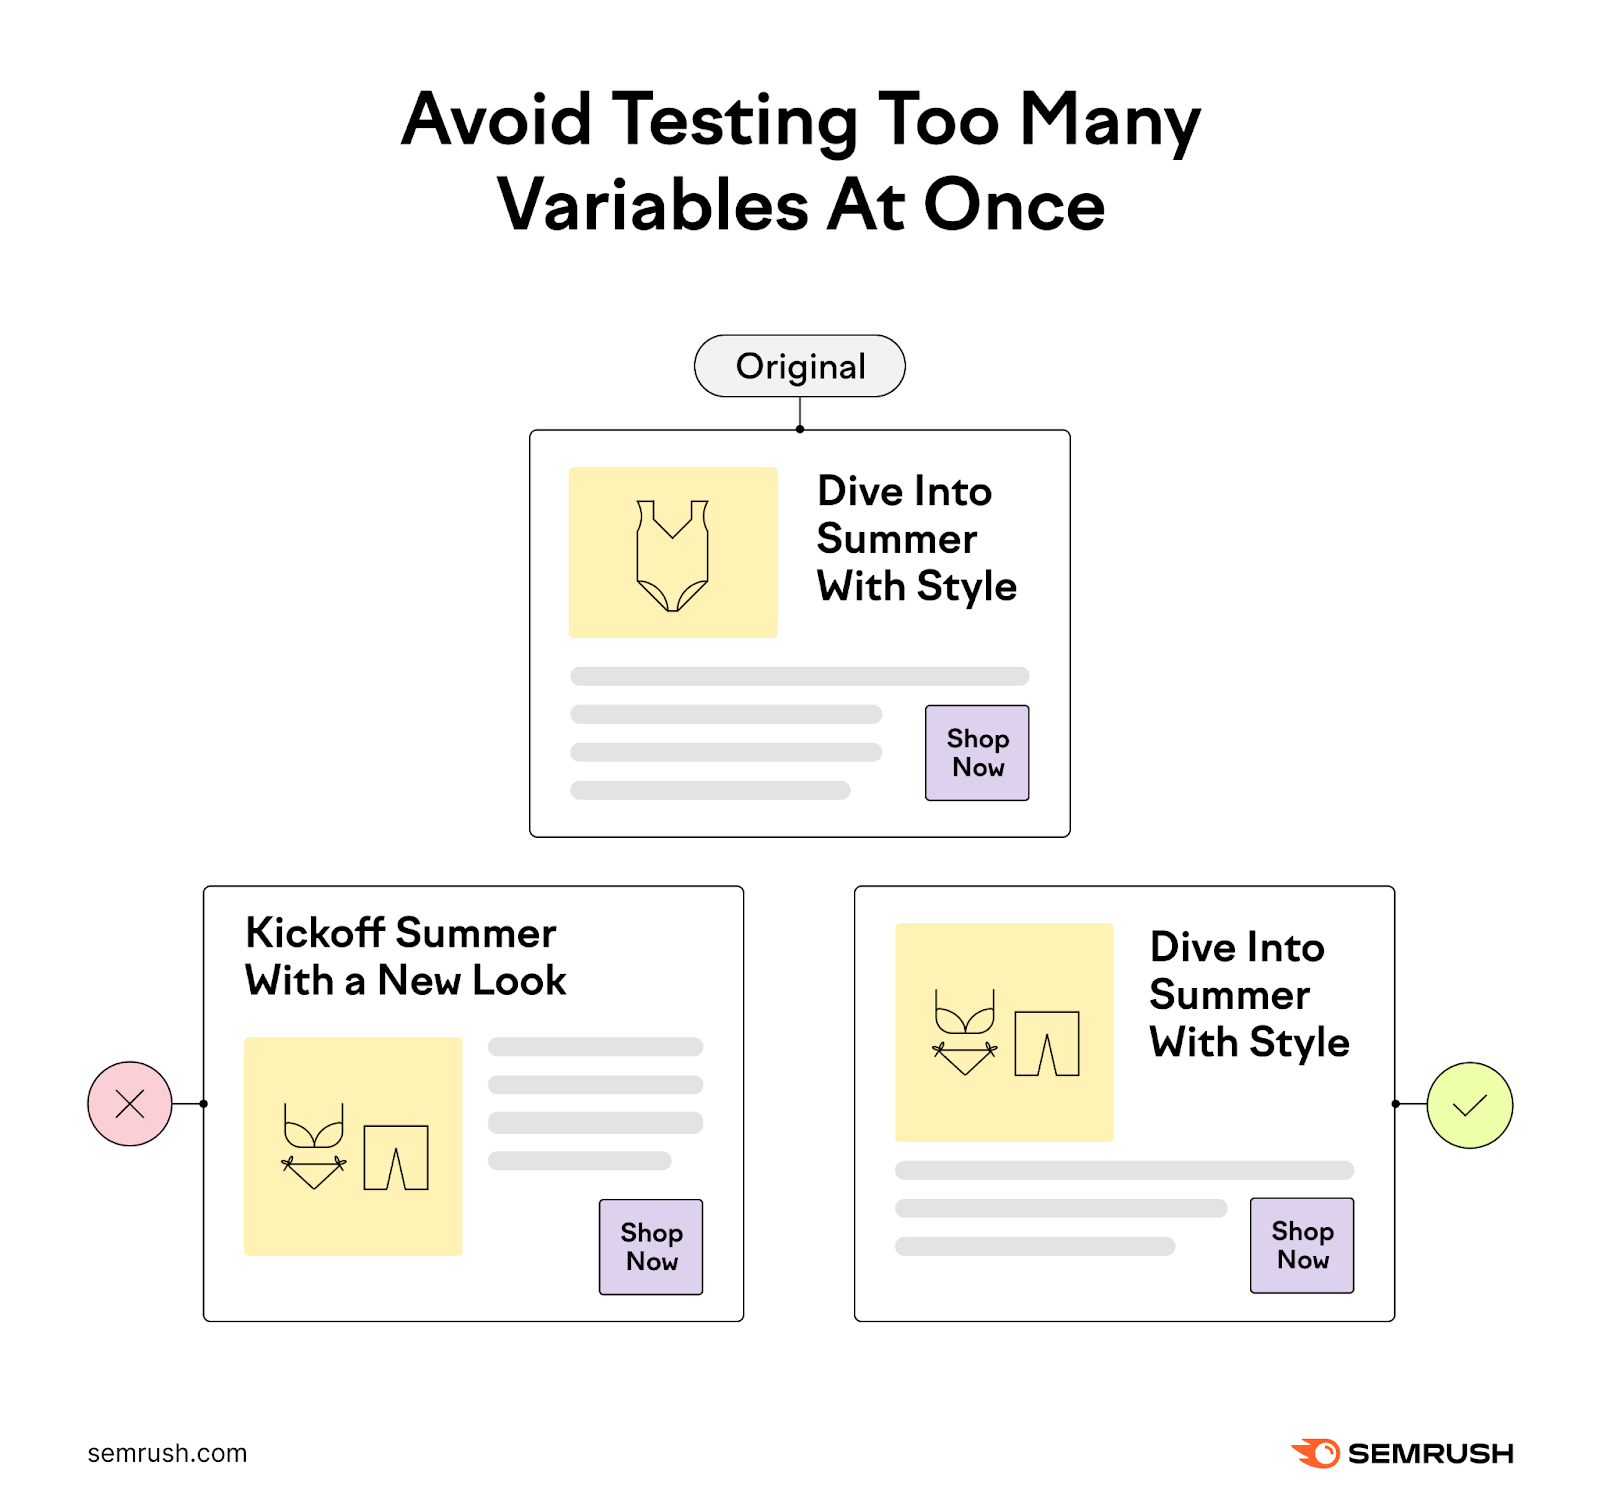 avoid testing too many variables at once. test either swapping the image or the headline but not both at the same time